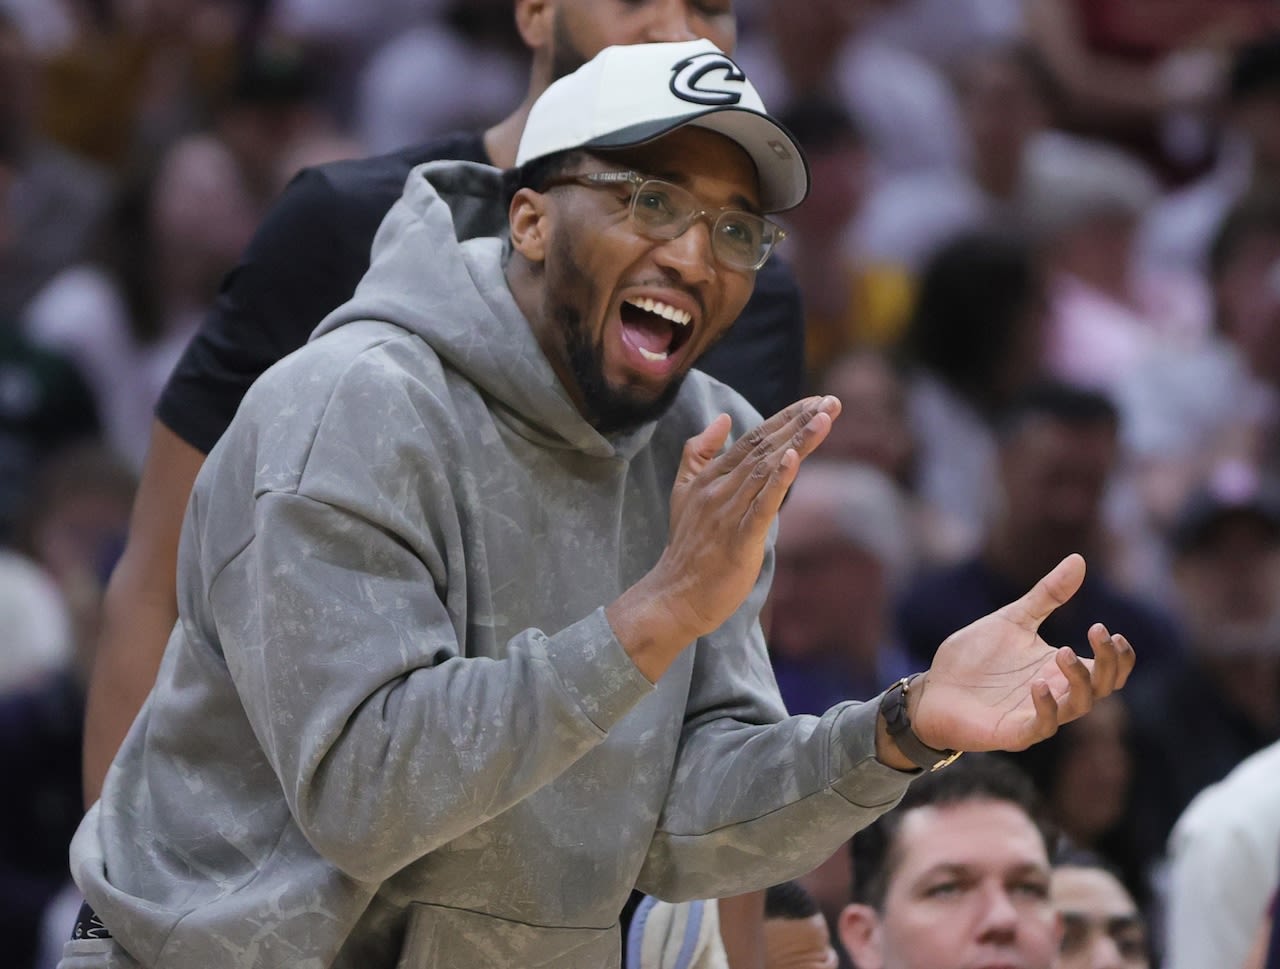 Wrap up Donovan Mitchell? Hire a new coach? Cavs can now make big moves – Terry Pluto